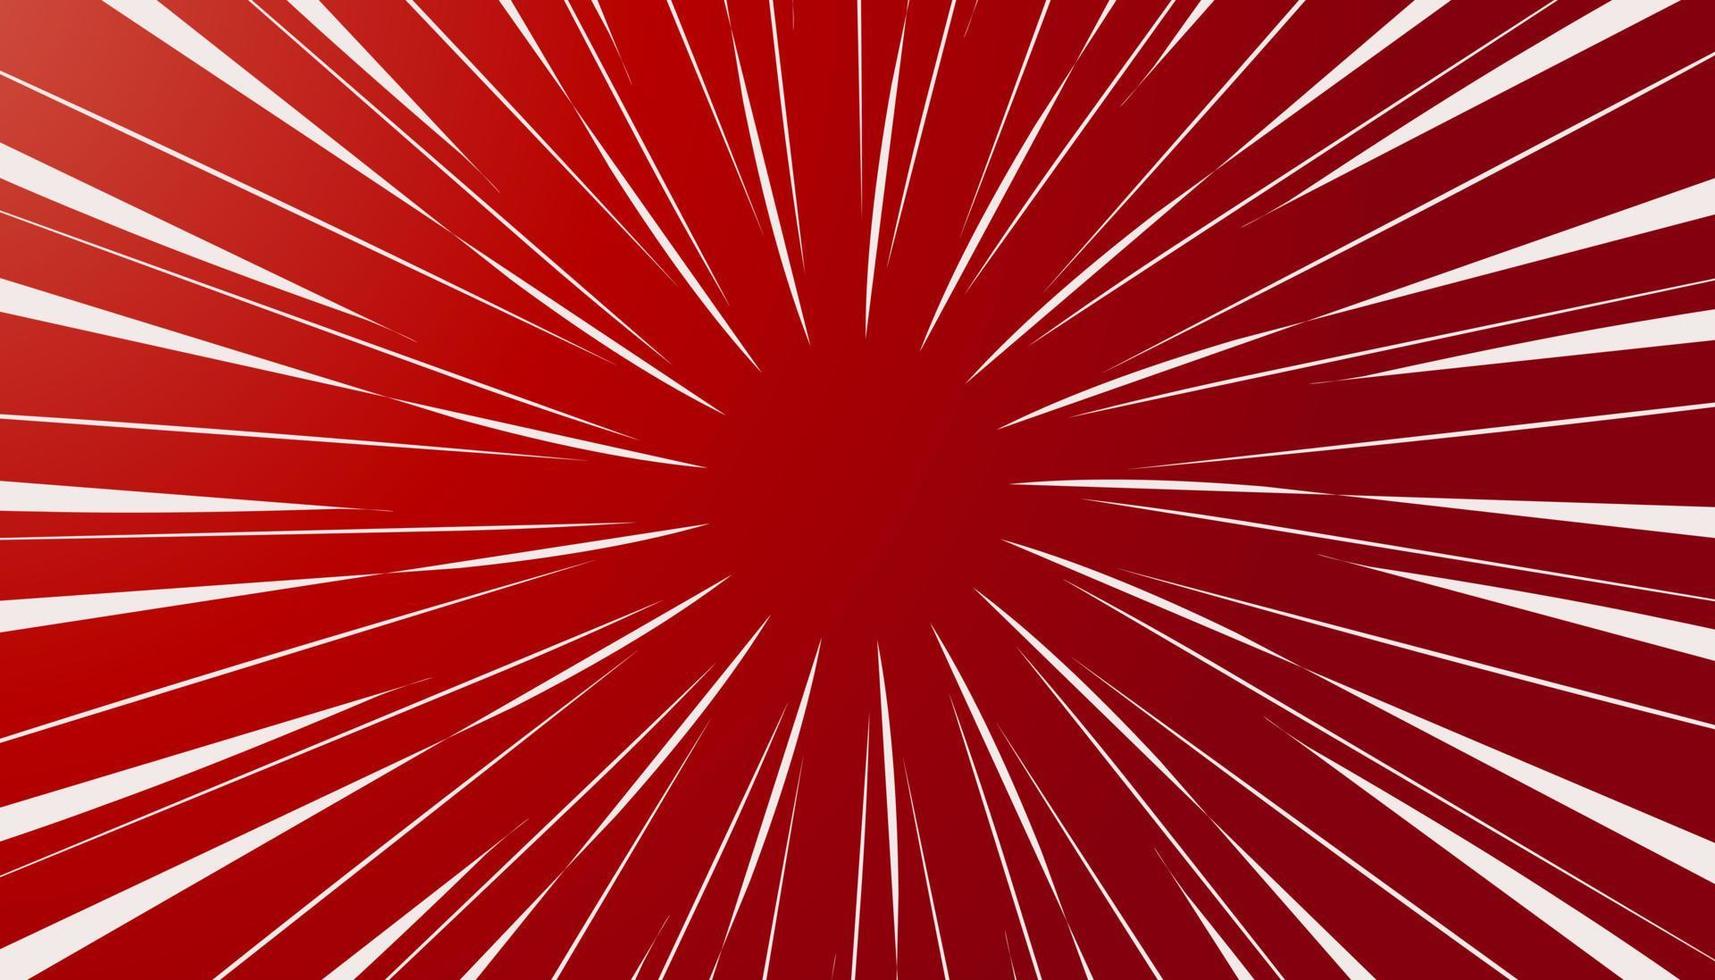 Abstract background illustration with a red theme vector